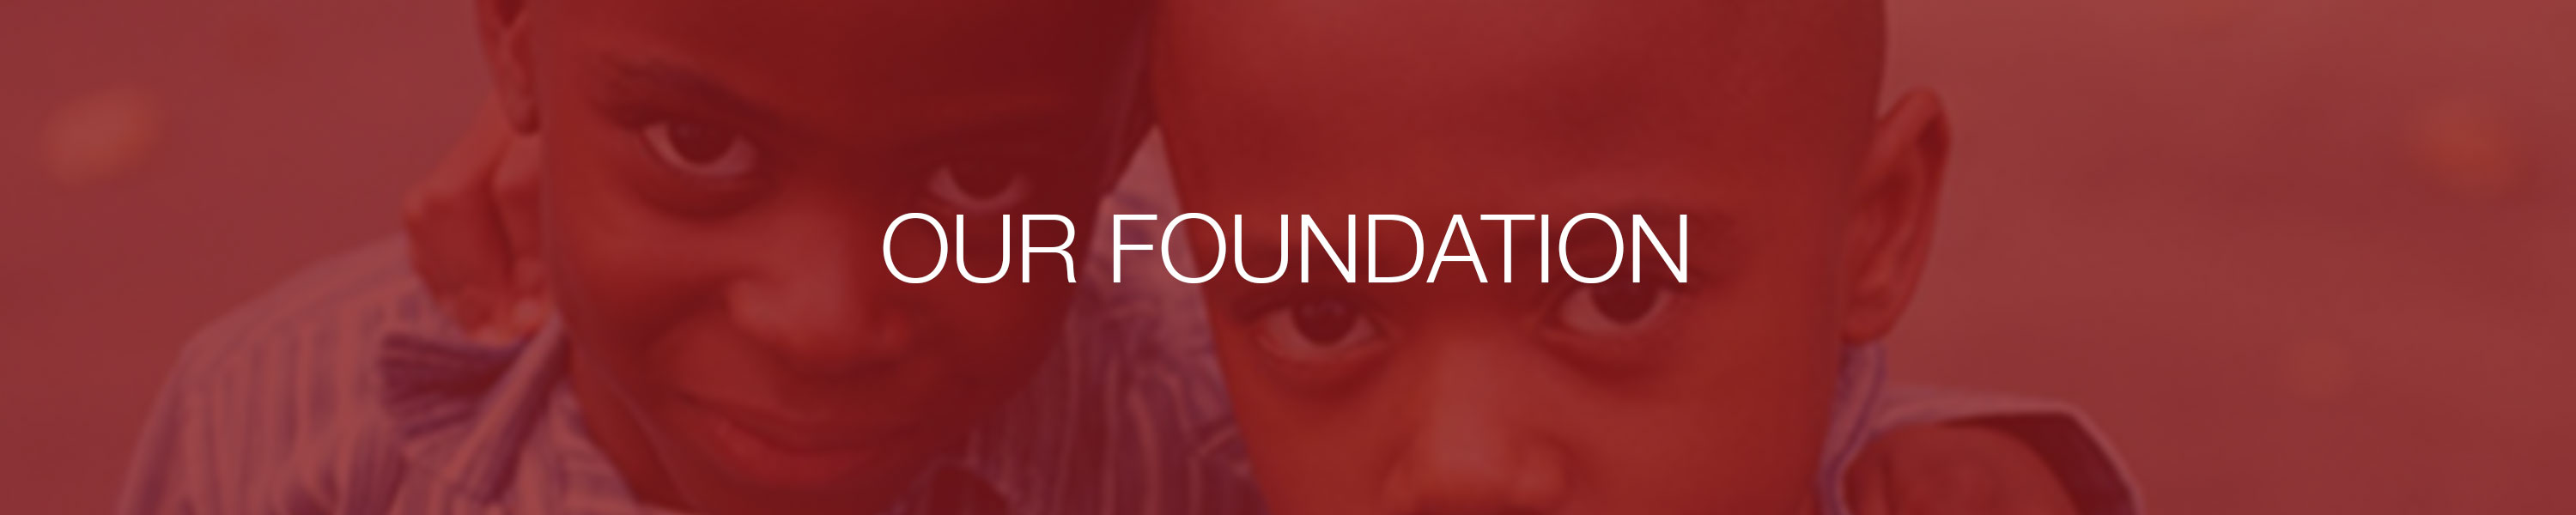 Our-Foundation